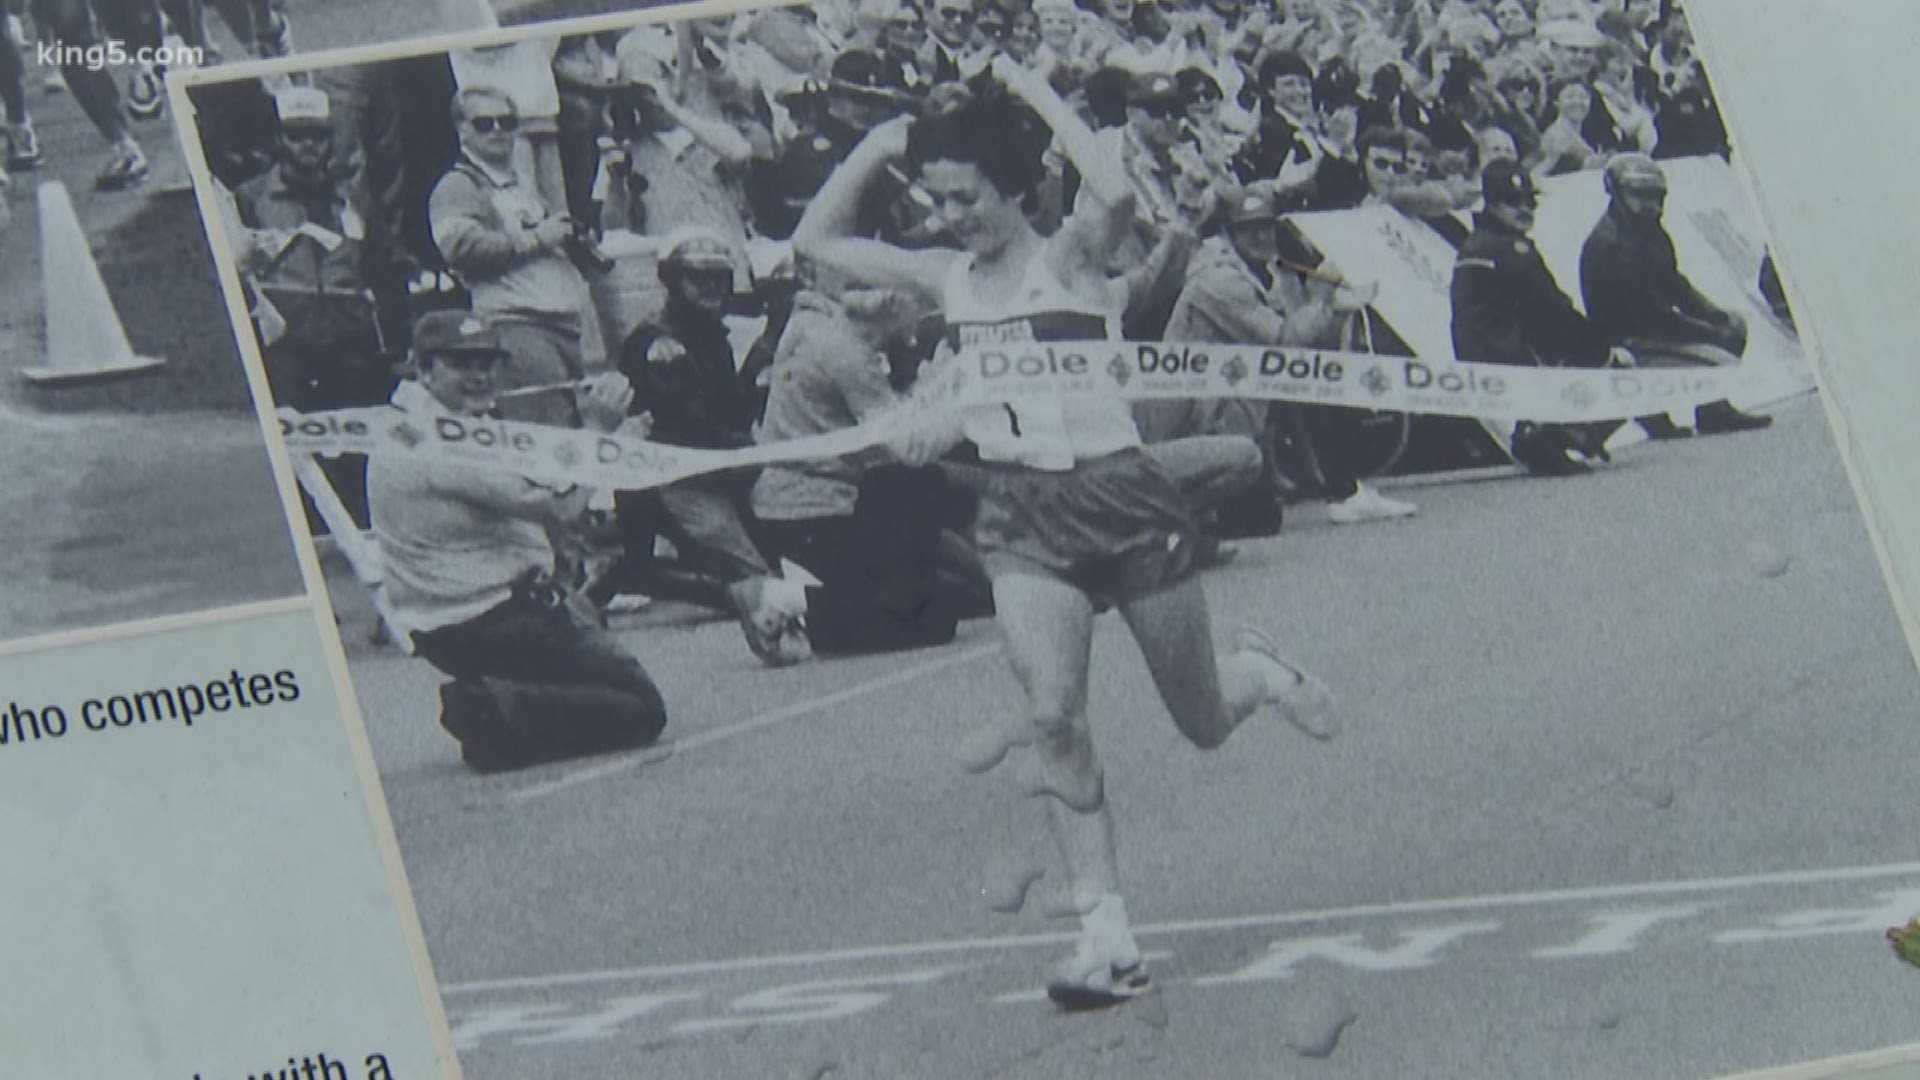 35 years ago this week, Olympia hosted the first ever qualifying race for the women's Olympic marathon. The winner of that race, the eventual gold winner, spoke with high school students and South Bureau Chief Drew Mikkelsen.